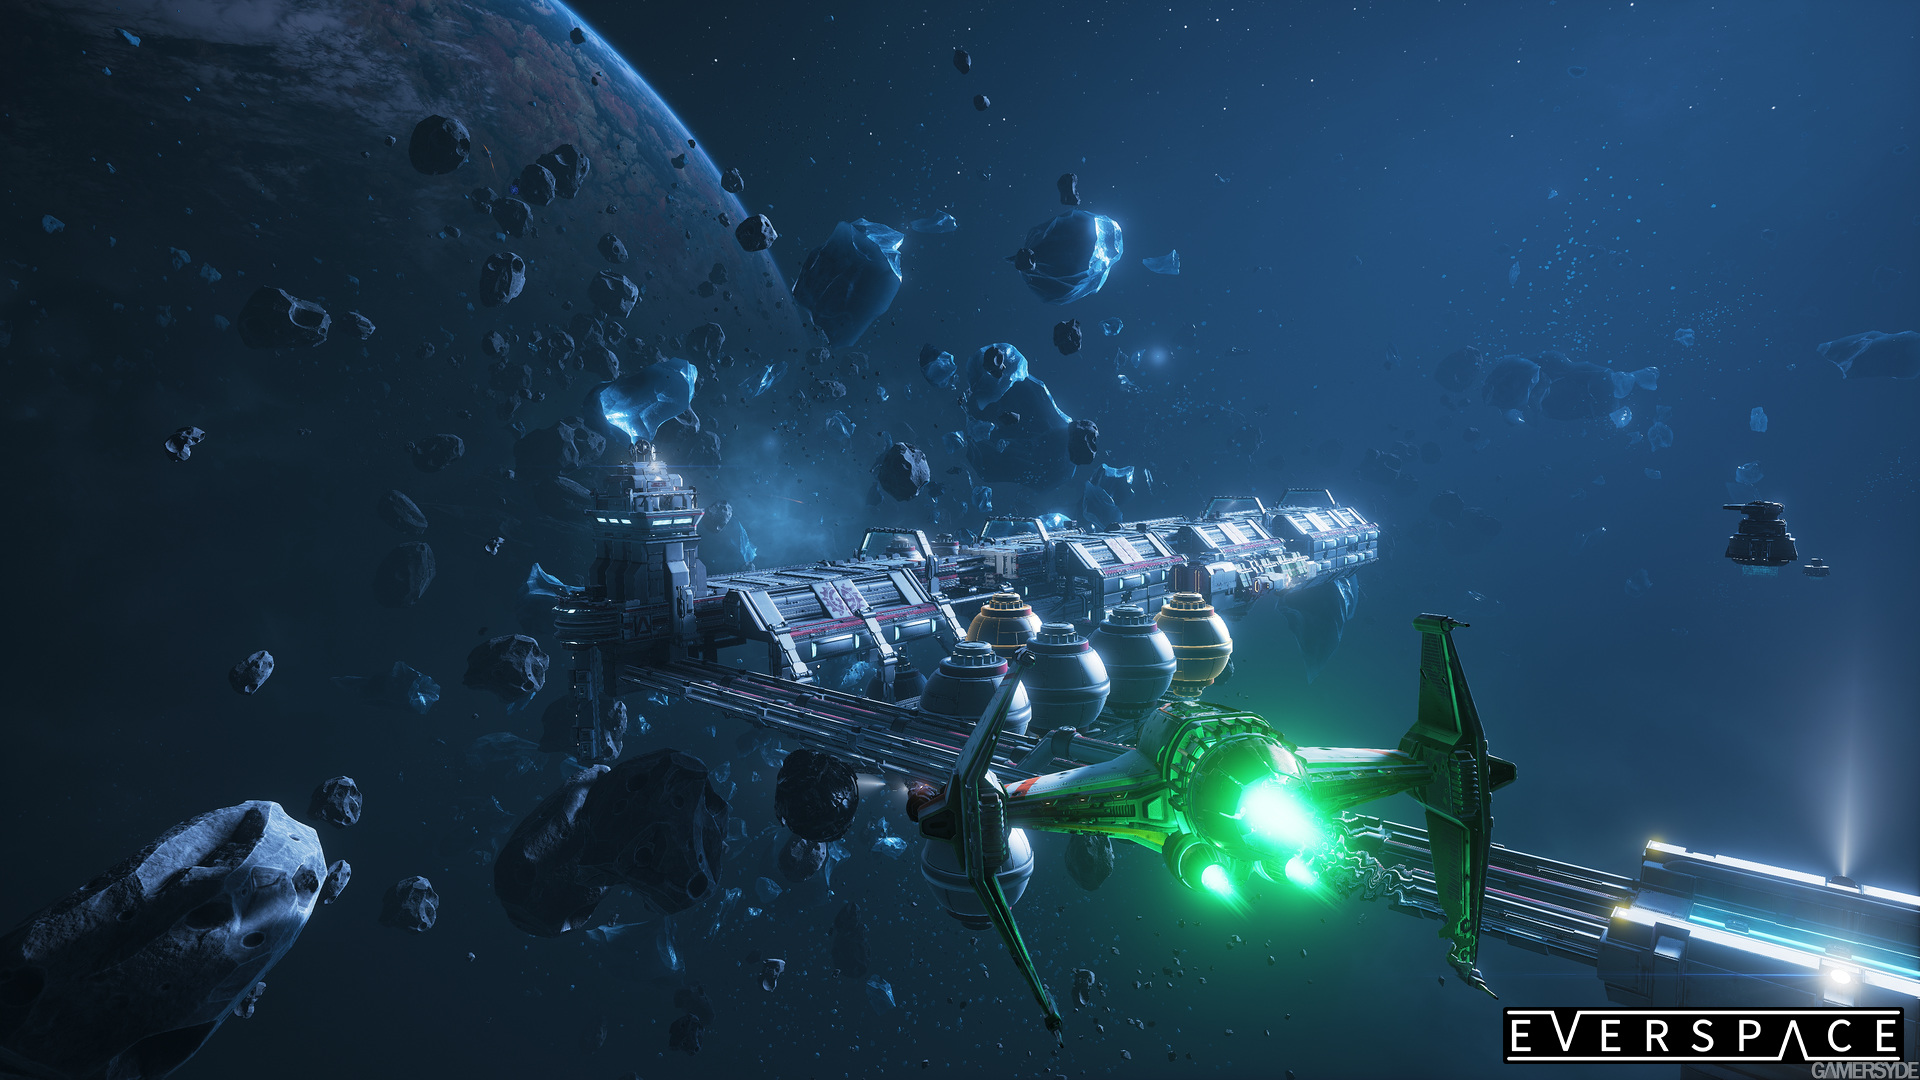 Everspace launches May 26 - Gamersyde